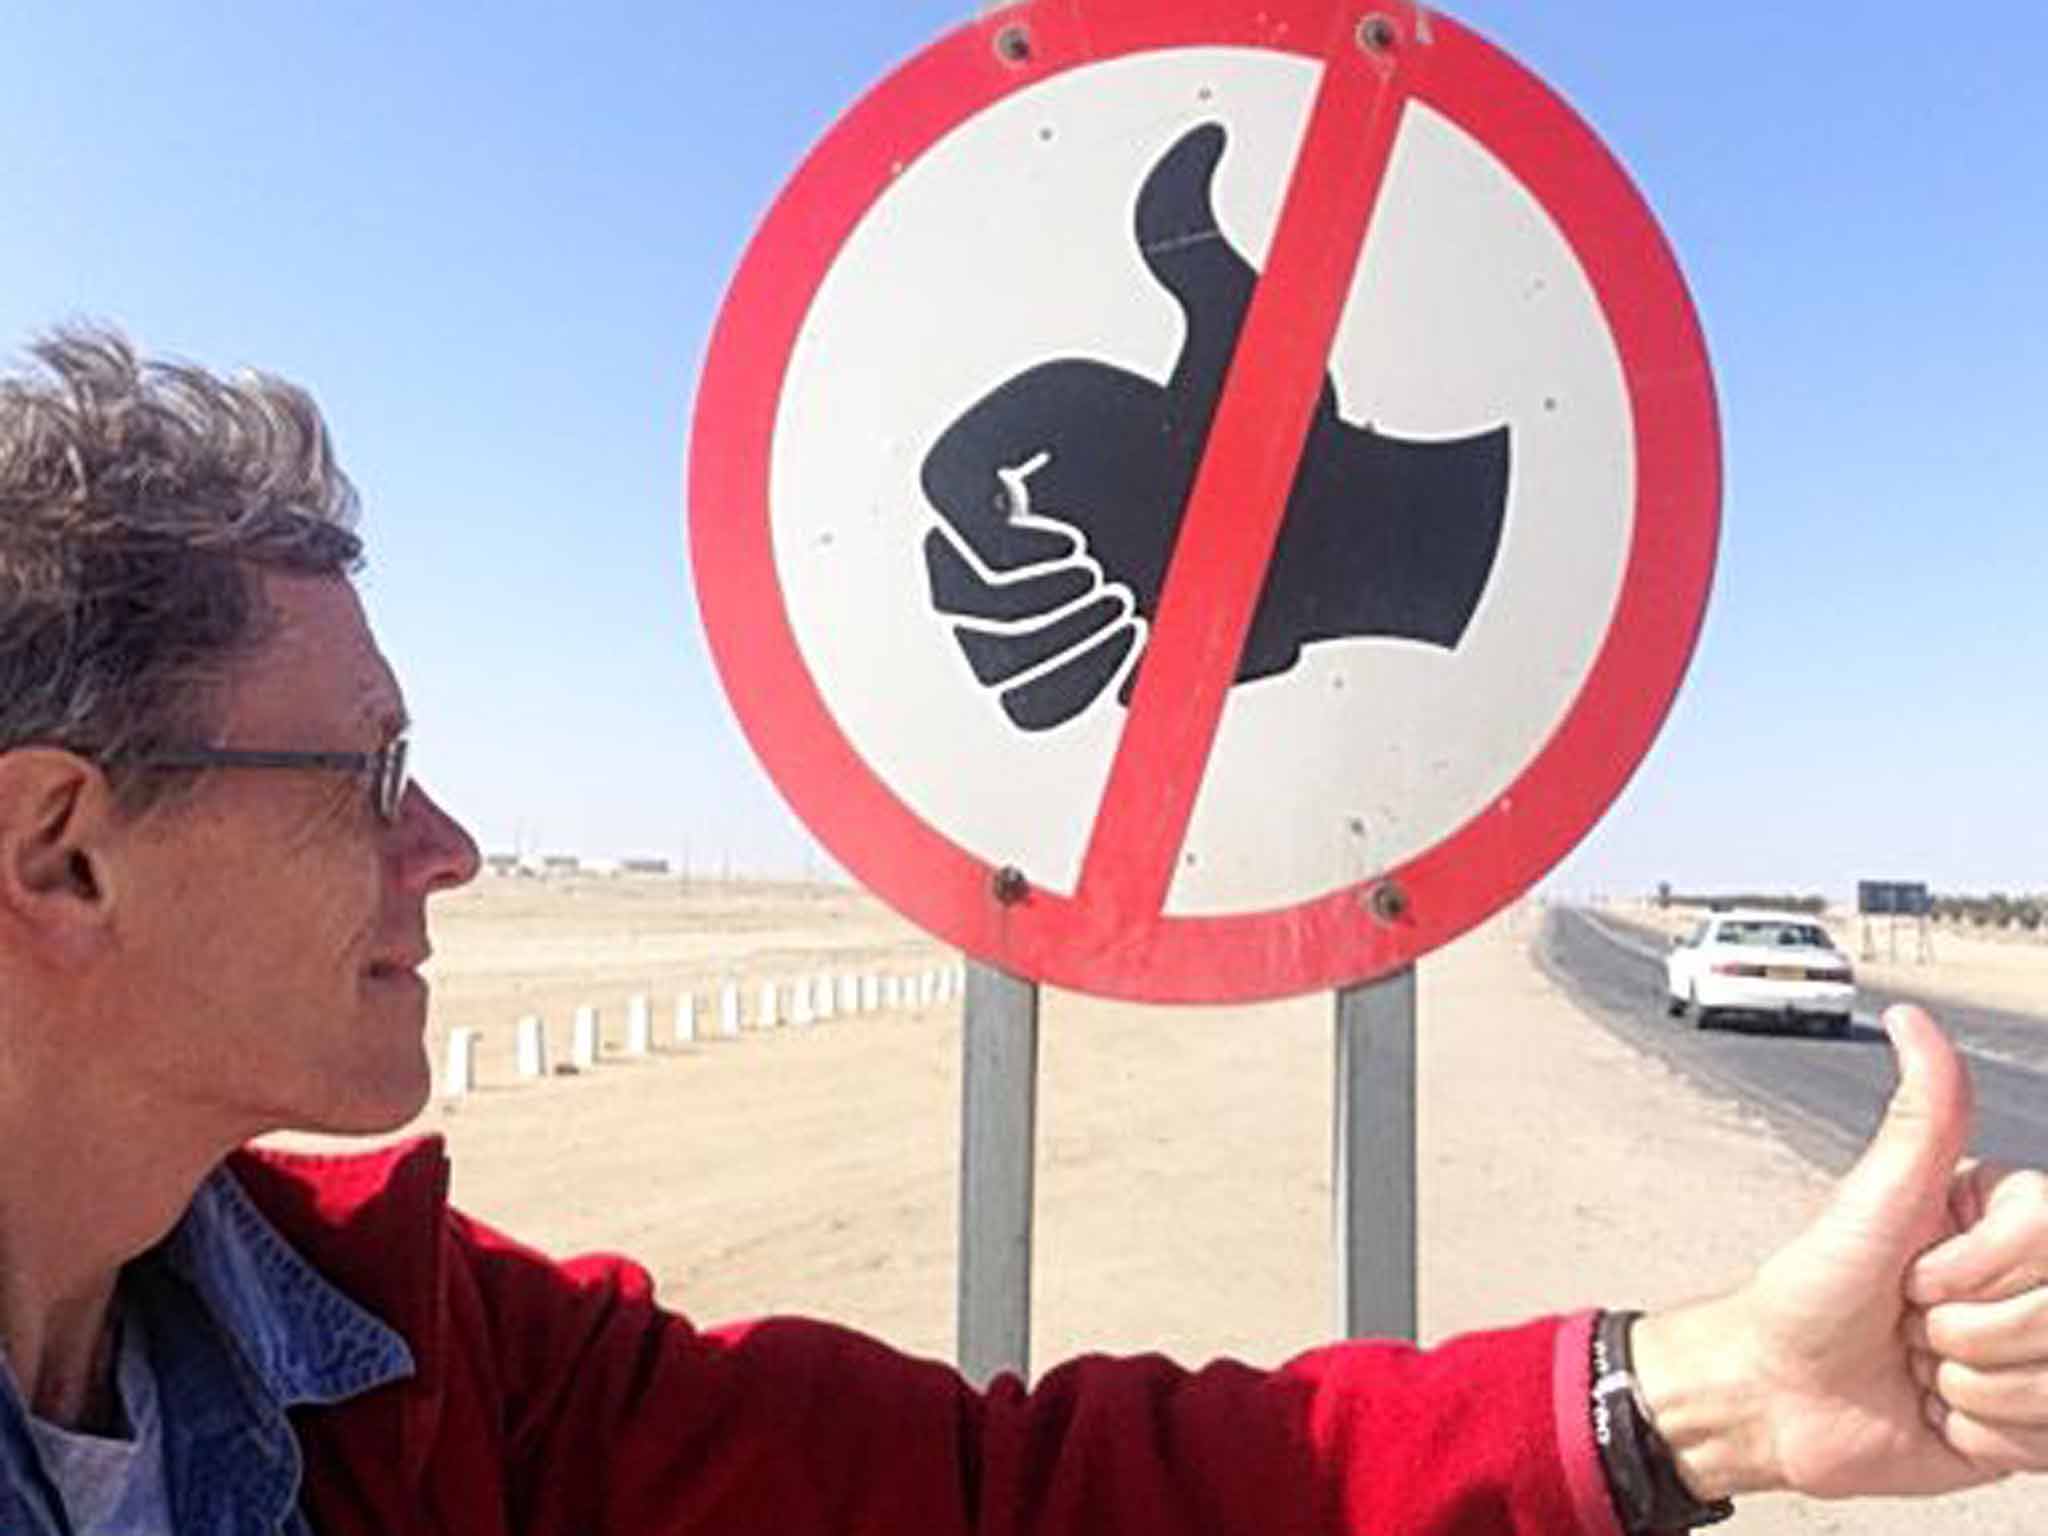 Red route: hitch-hiking is prohibited in Namibia